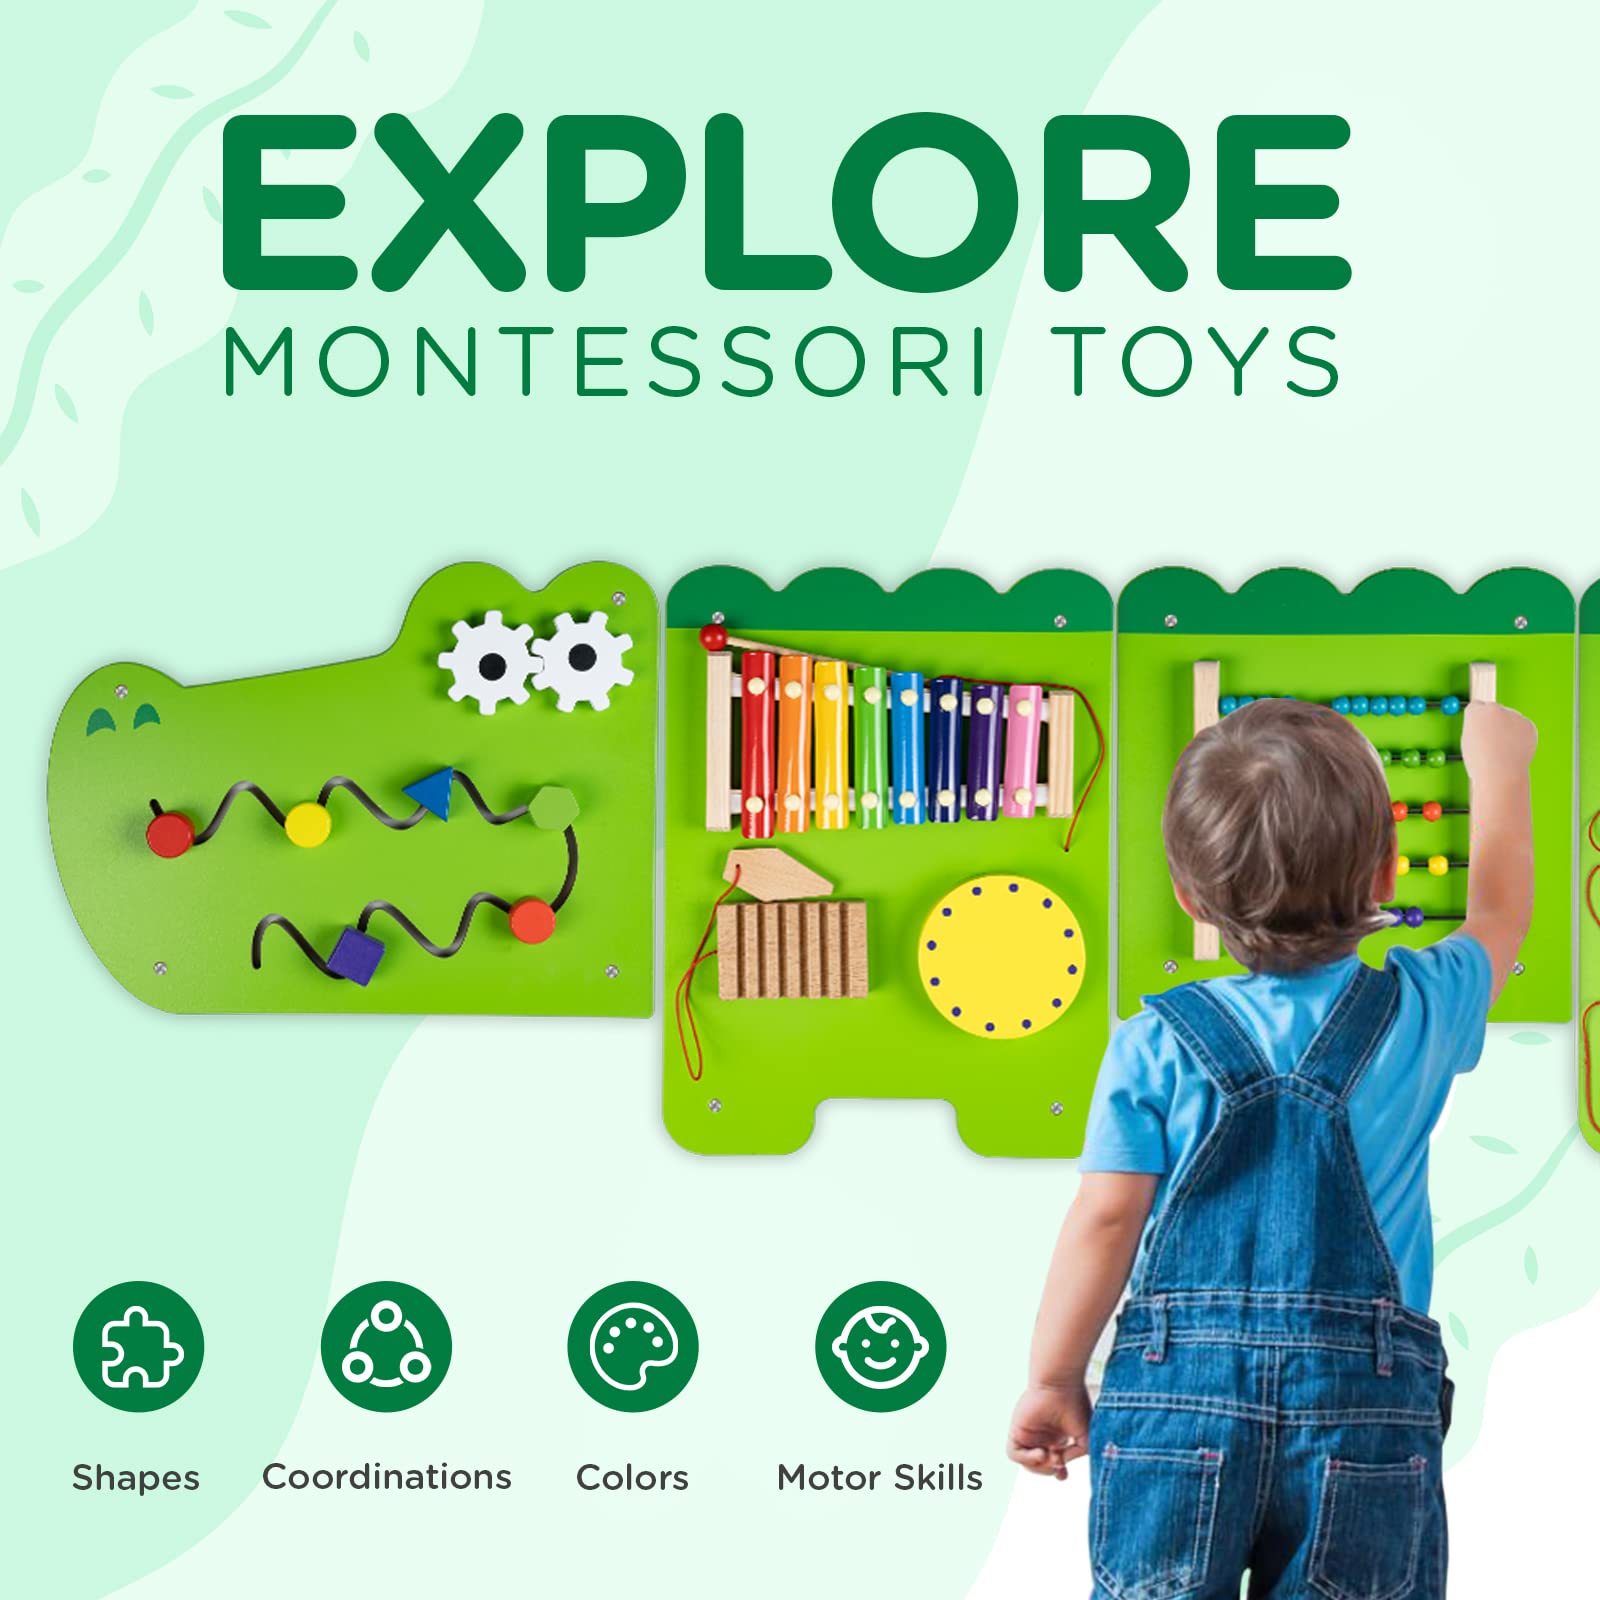 Monläurd® Crocodile Montessori Busy Board,Sensory Board,Educational Toys,Activity Cube,Wall Toys,Daycare Furniture,Playroom Furniture,Interactive Toys,Wooden Toys,Learning Toys,Boys and Girls 6 M+